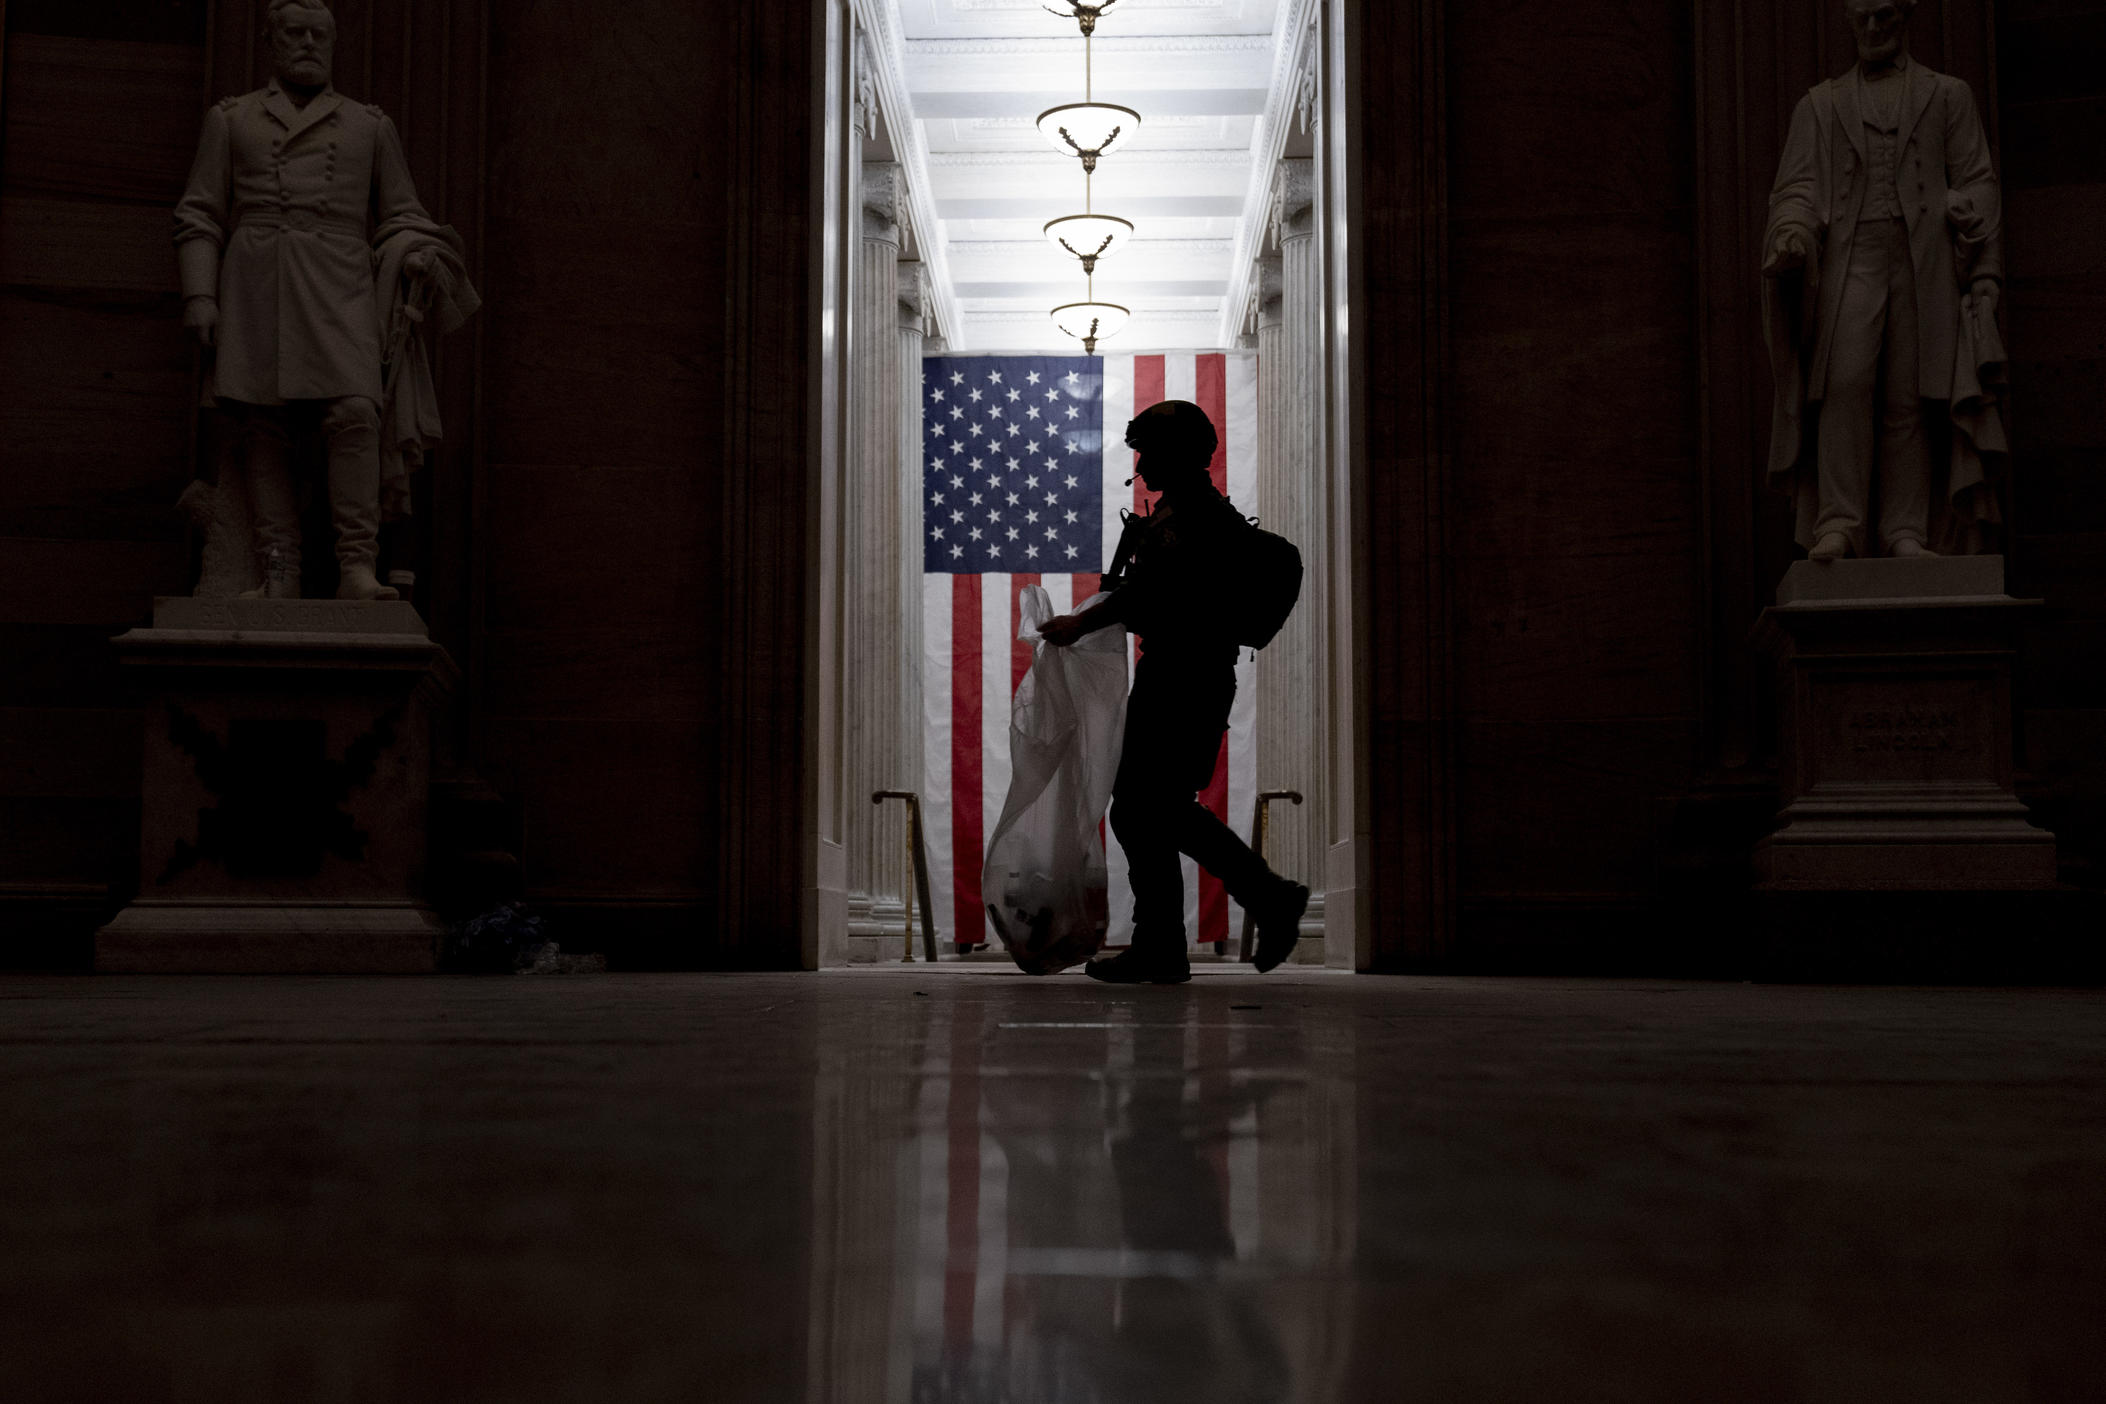 An ATF police officer cleans up debris and personal belongings strewn across the floor of the Rotunda in the early morning hours of Thursday, Jan. 7, 2021, after protesters stormed the Capitol in Washington, on Wednesday. 